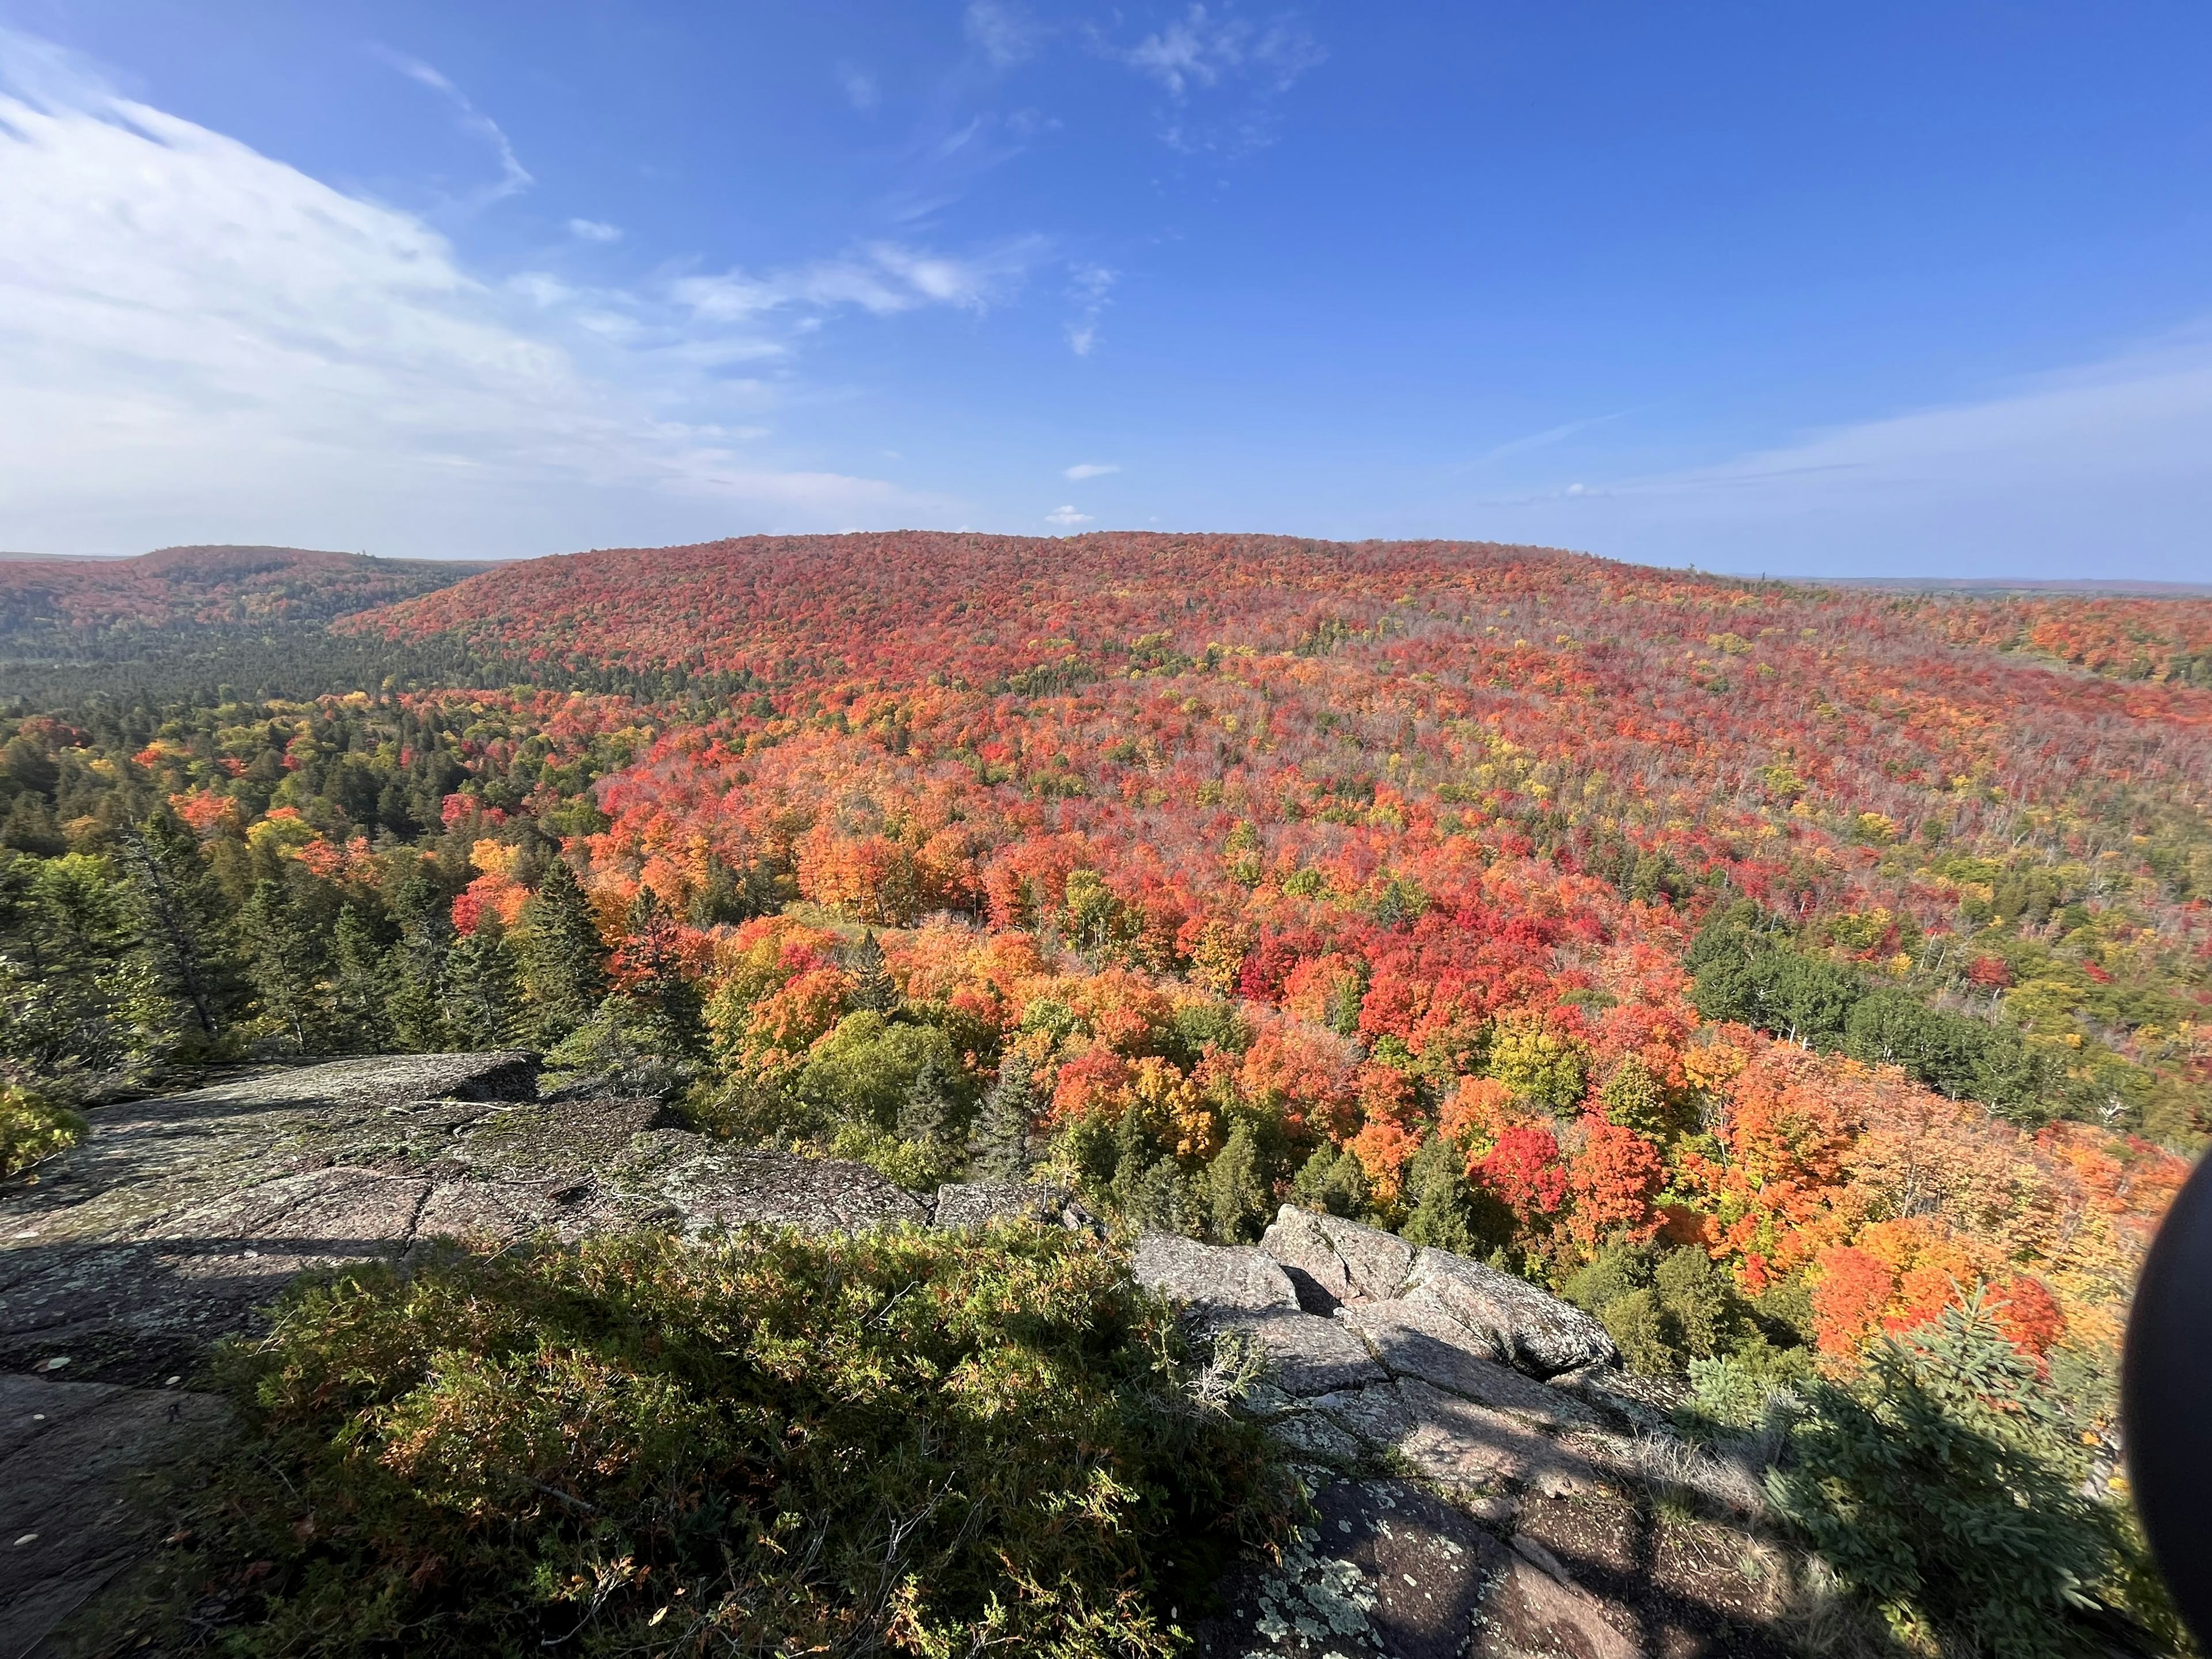 A rocky outlook in the foreground offers a panoramic view of the surrounding fall-colored forest. Bright red, orange and yellow trees are interspersed with green pine trees